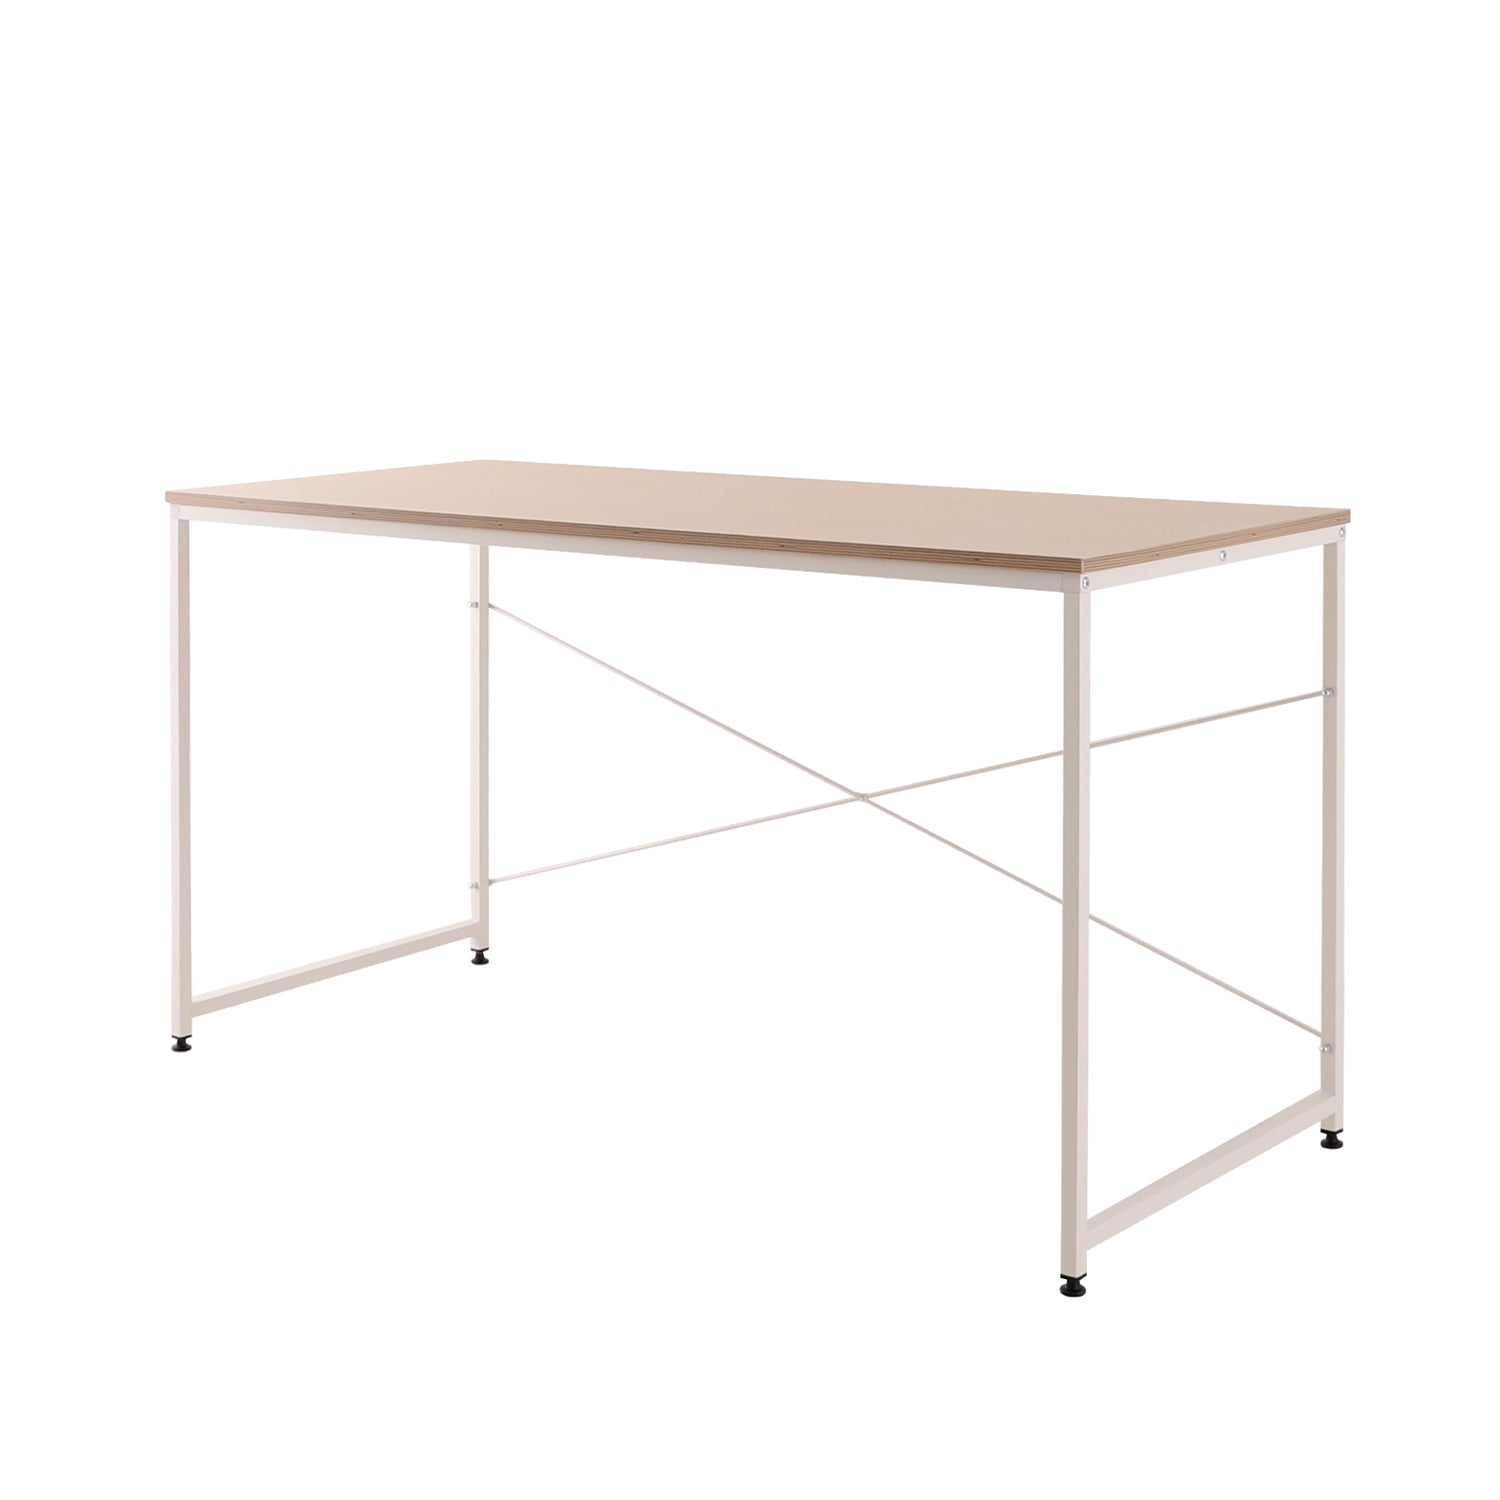 SOFSYS modern industrial computer desk with oak table top and white metal frame. simple stylish desk for working, gaming, writing, more